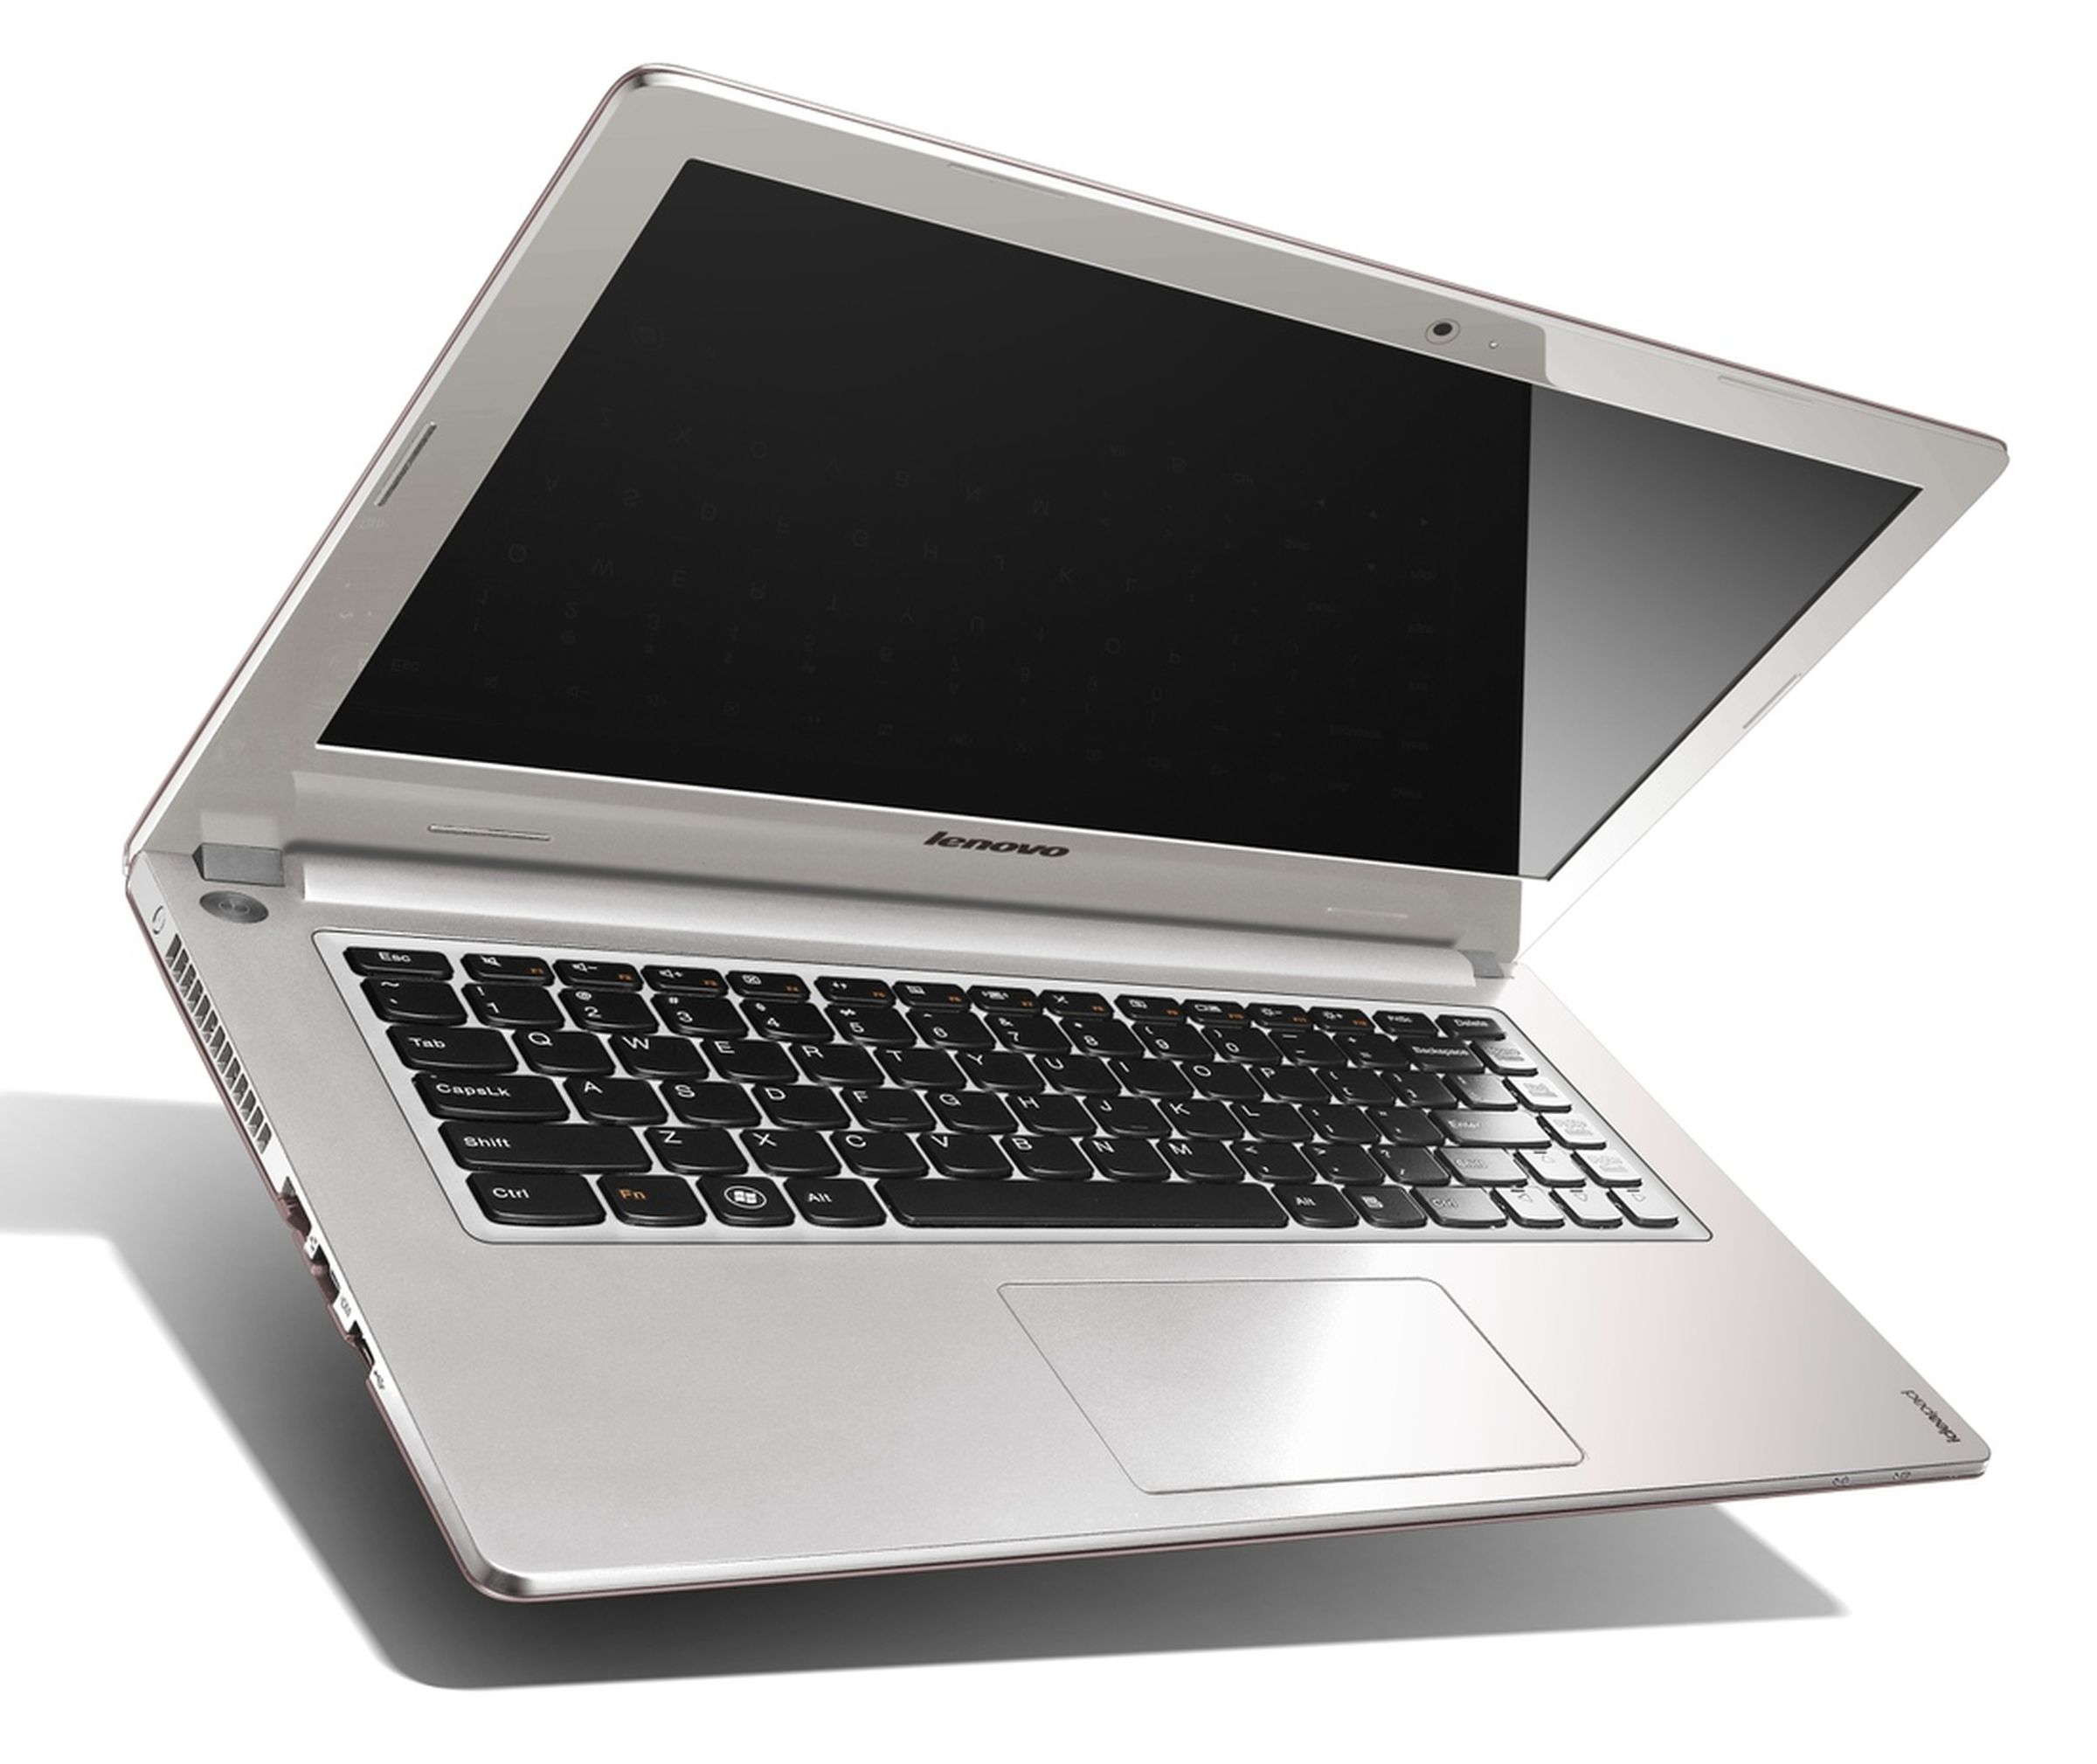 Lenovo IdeaPad S300, S400 and S405 press pictures